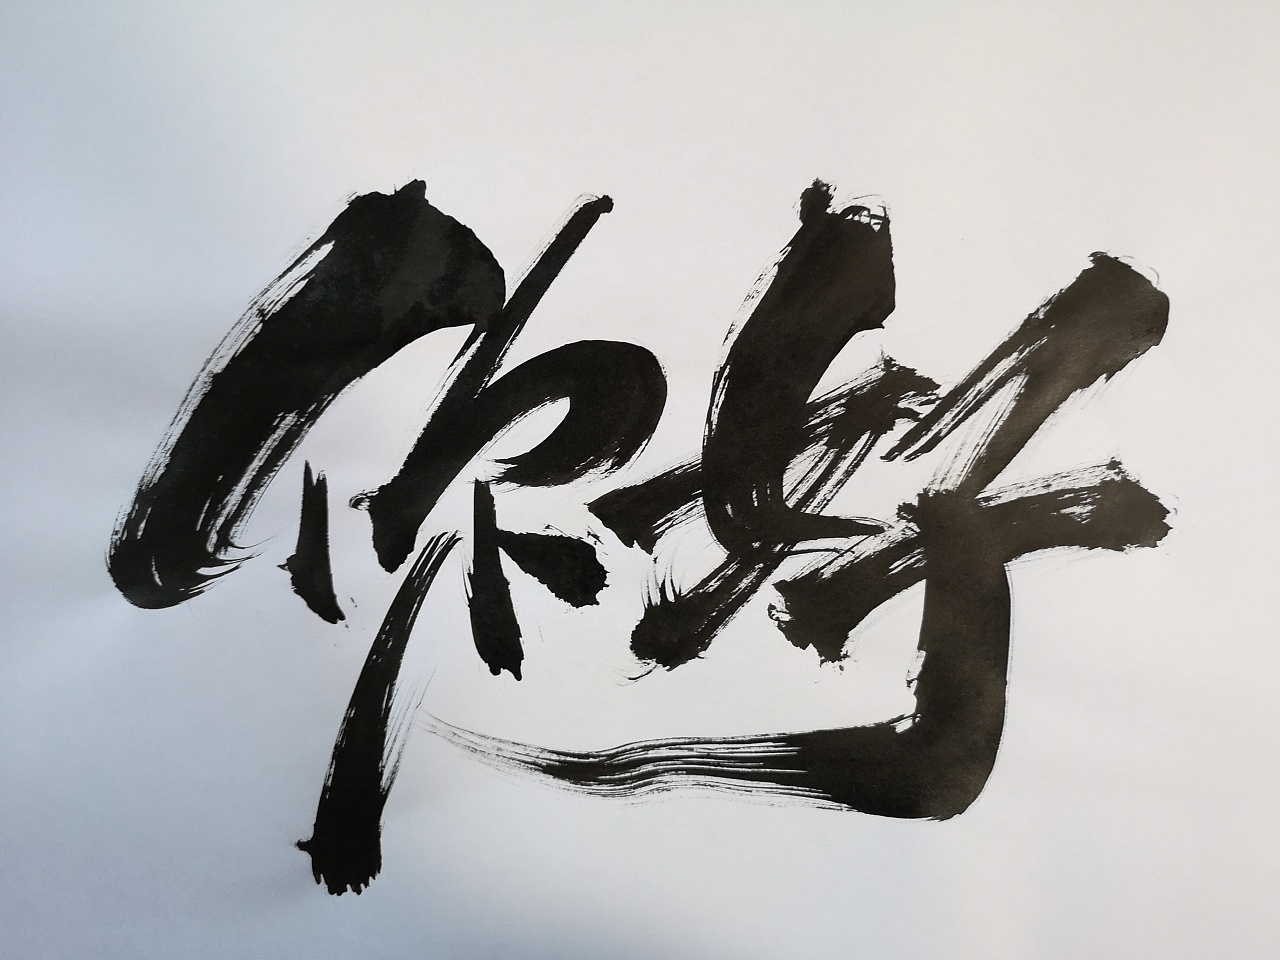 45P Chinese traditional calligraphy brush calligraphy font style appreciation #.1009